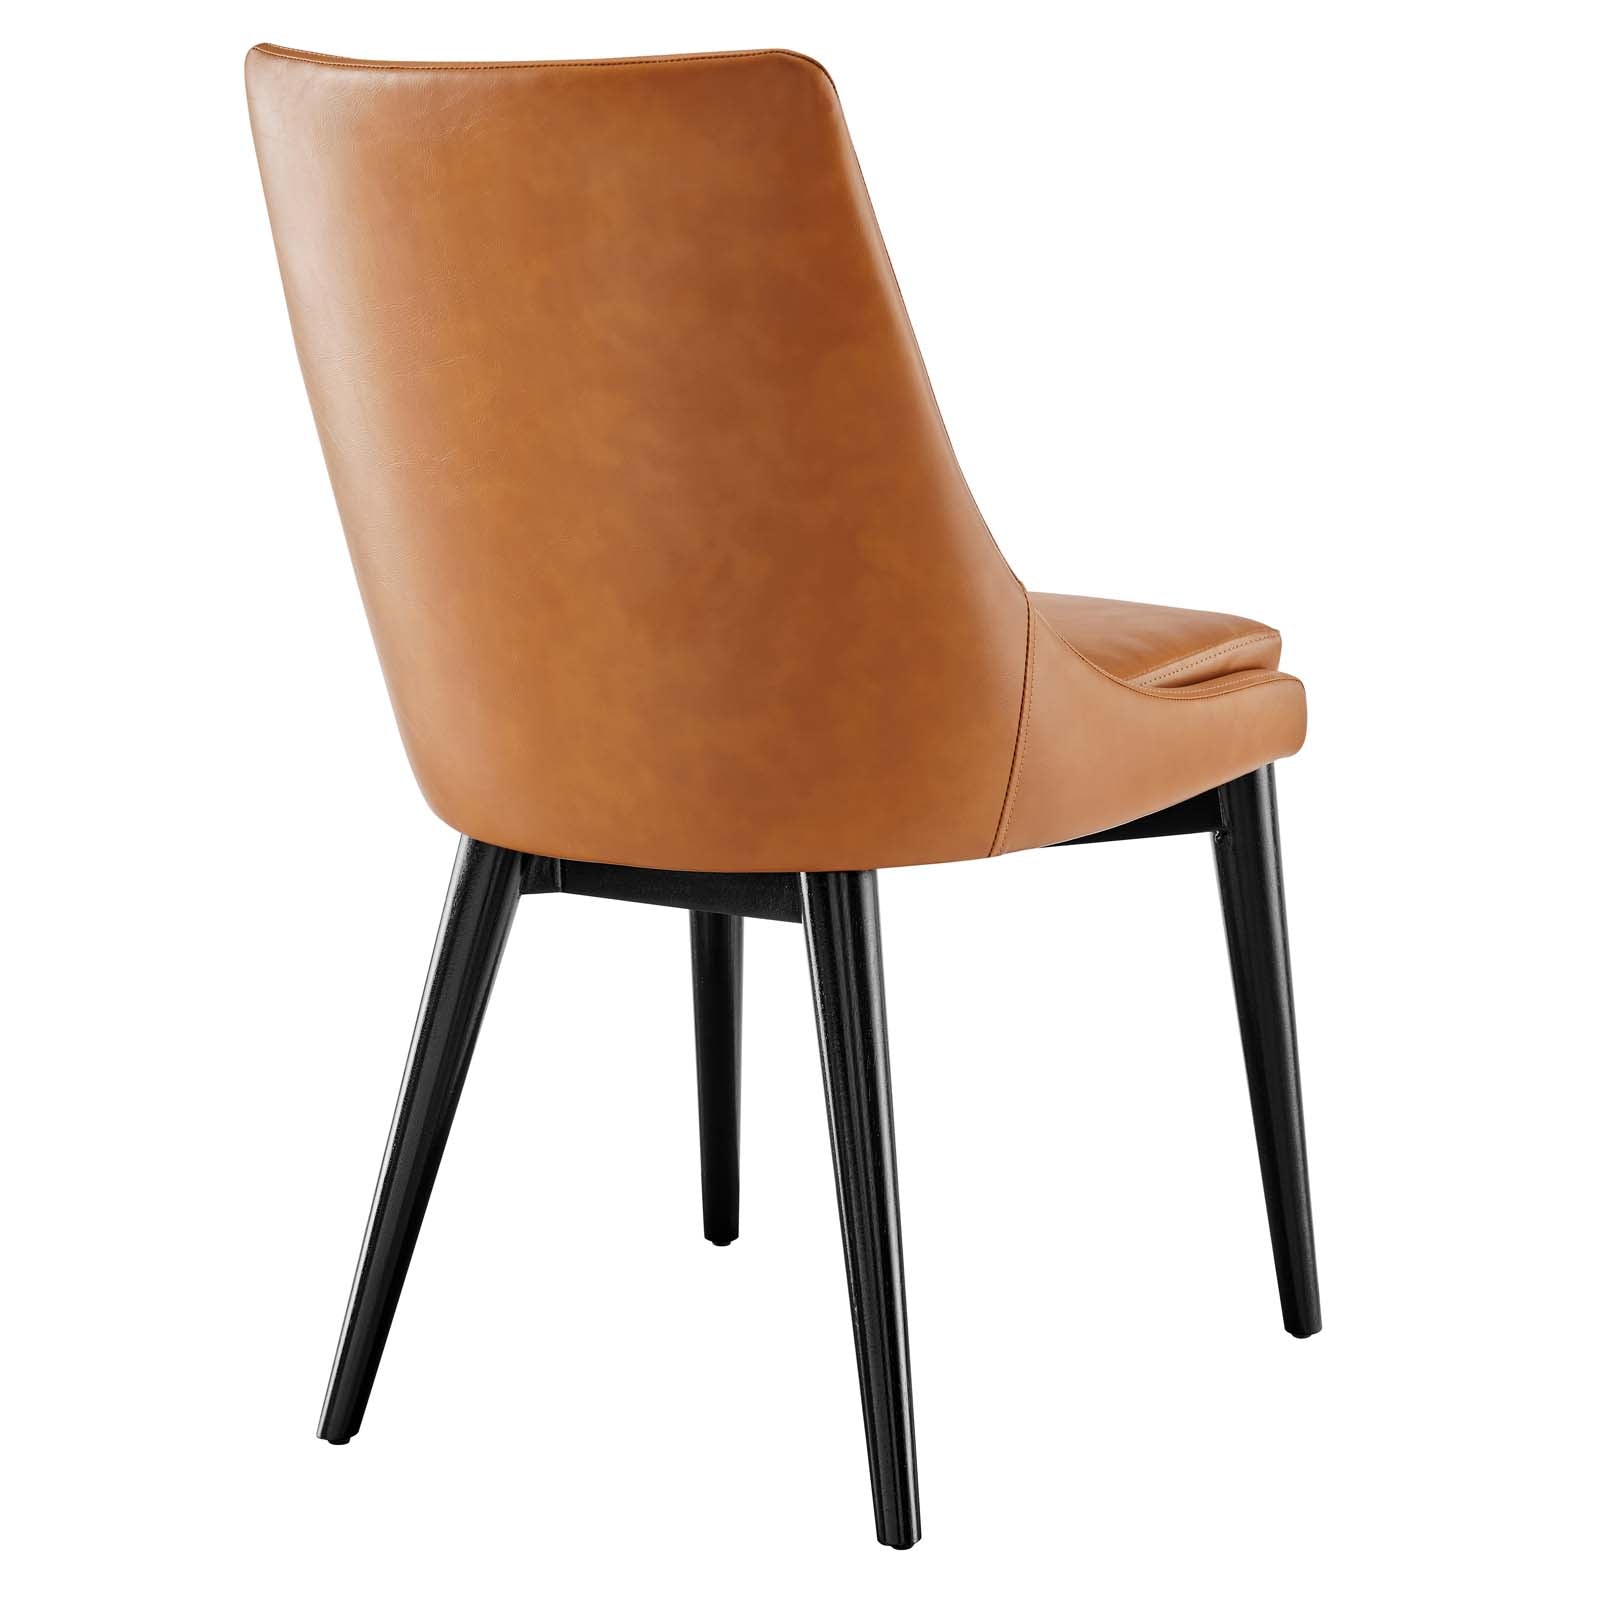 Viscount Vegan Leather Dining Chair - East Shore Modern Home Furnishings